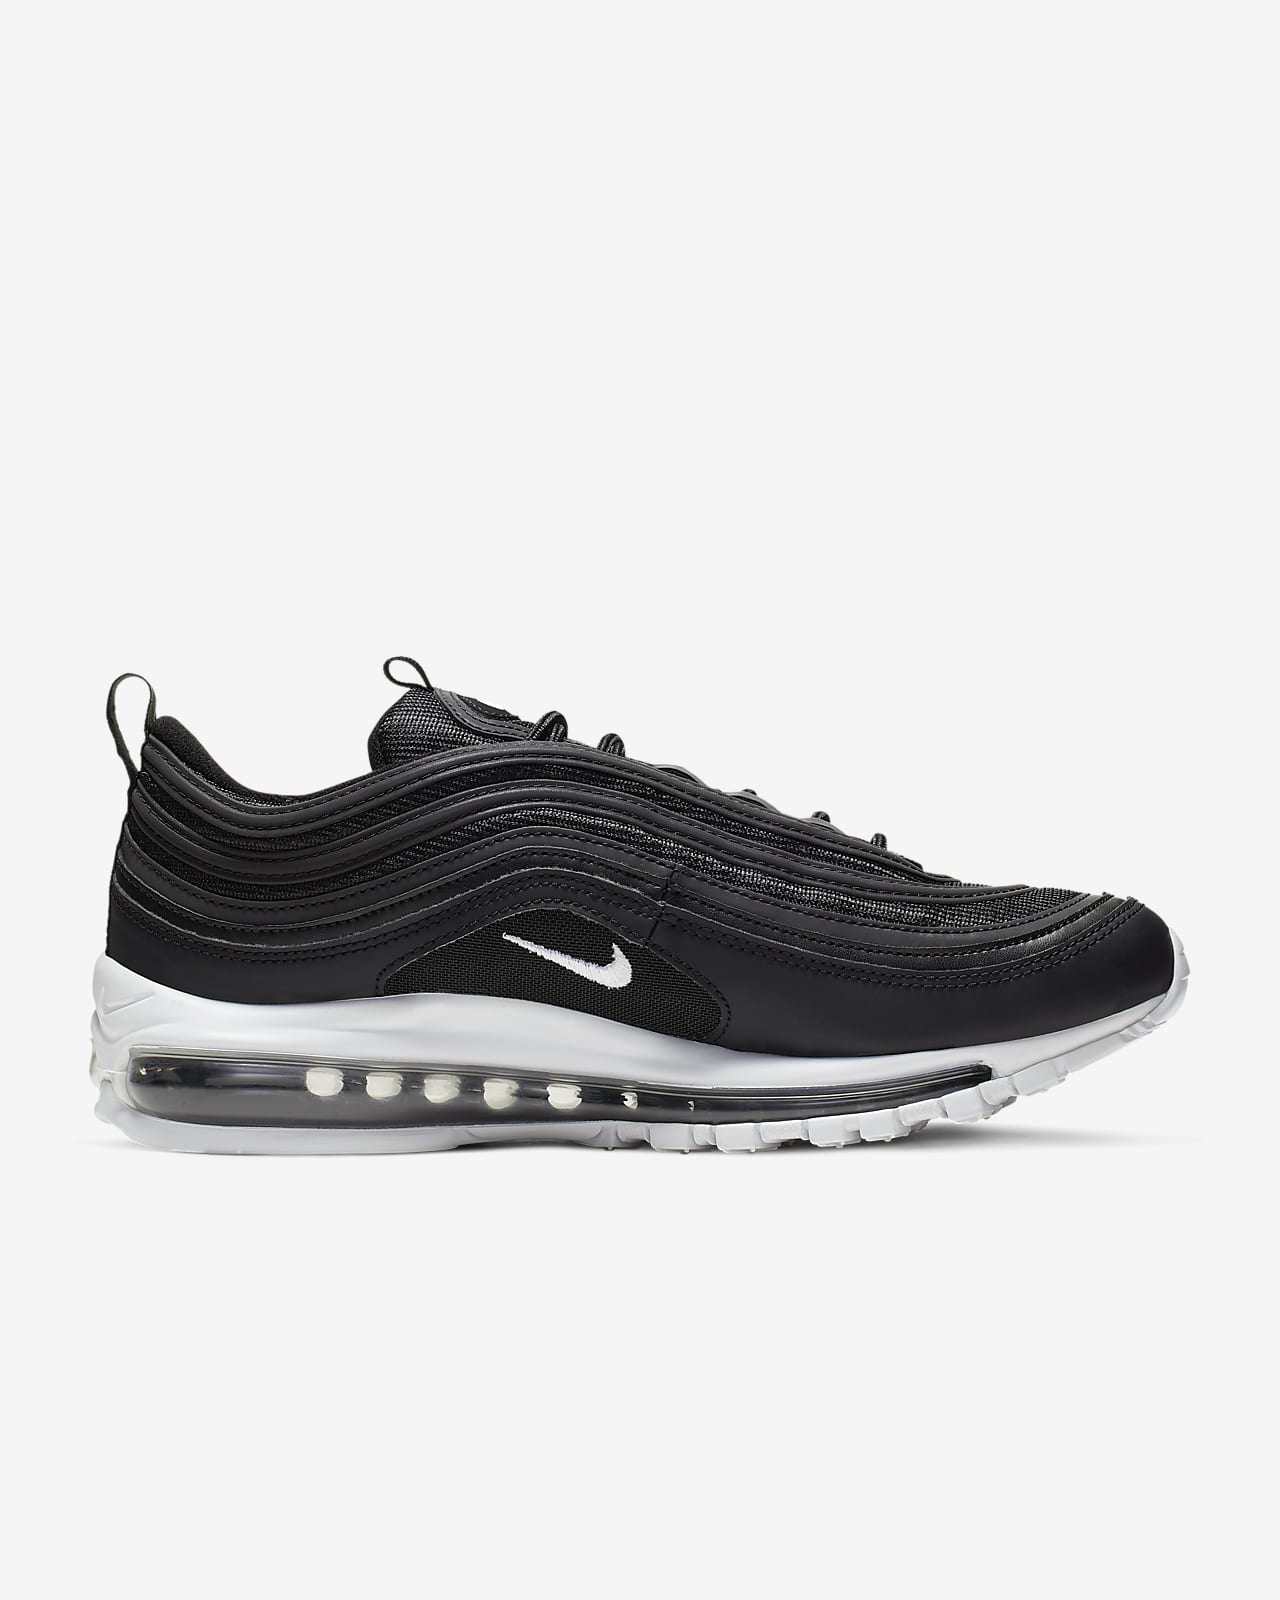 nike air max 97 black and white size 5